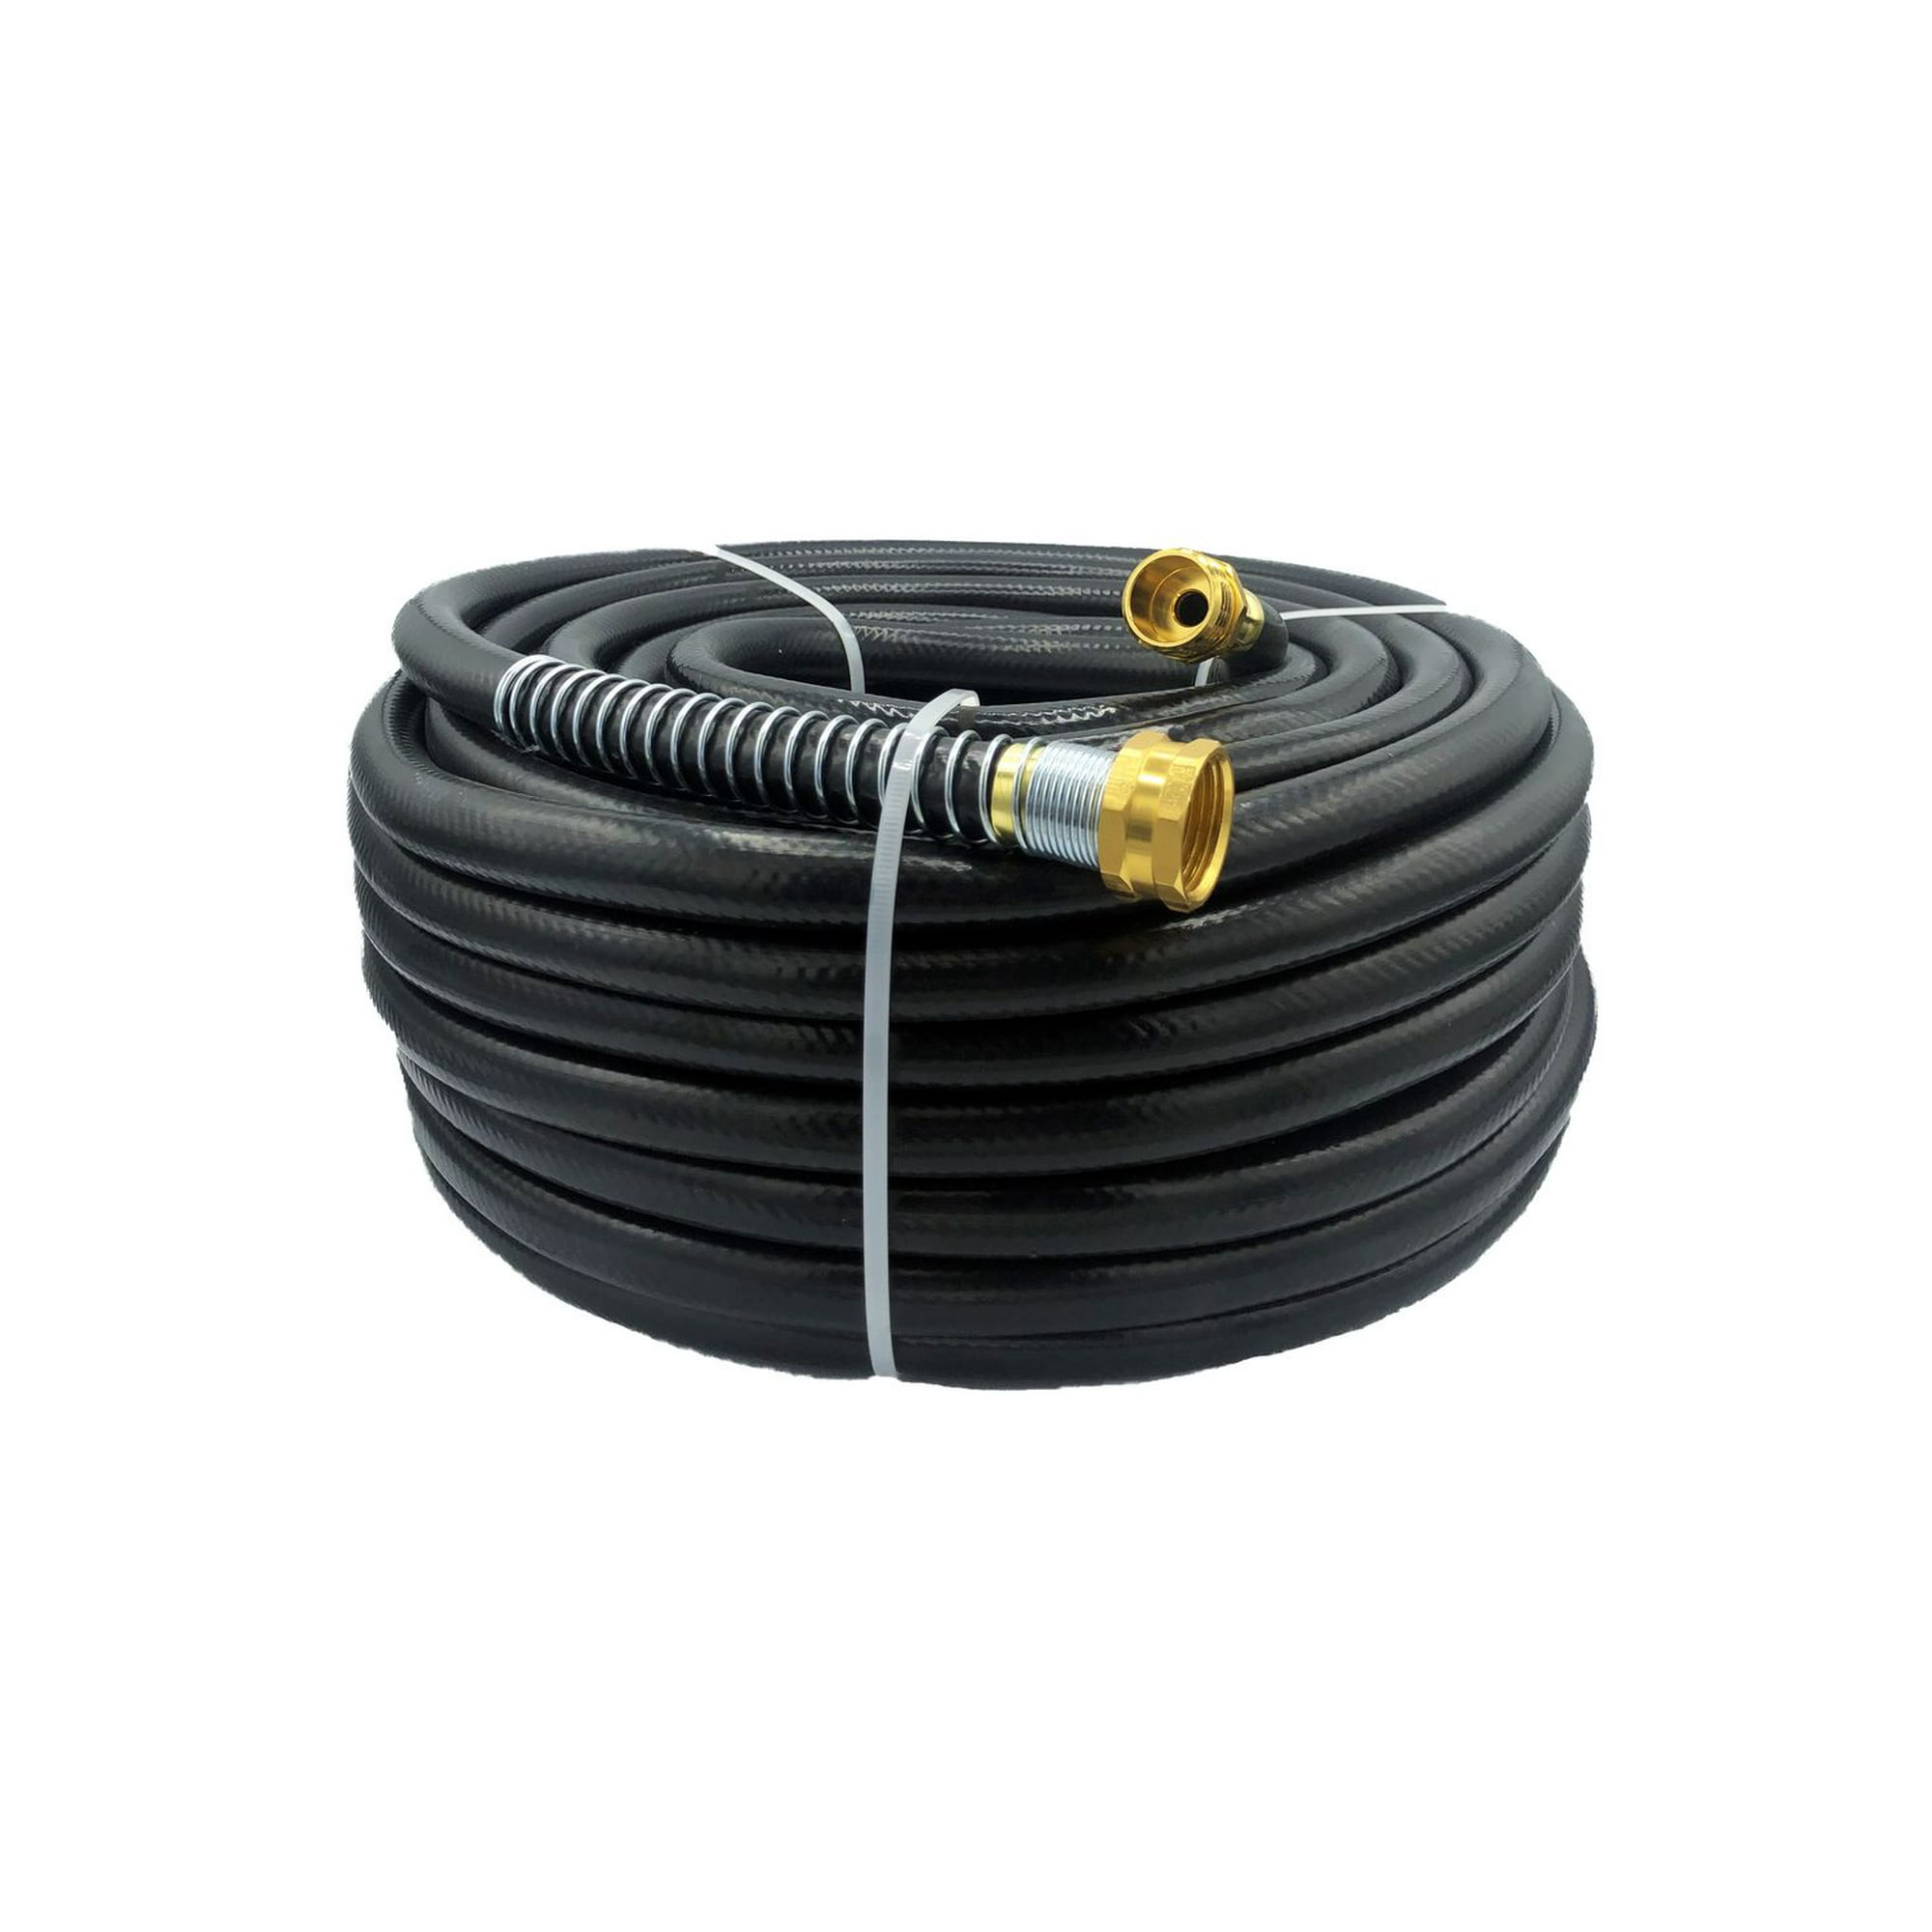 EASY SHOP AIR LINE PIPING SYSTEM 100 FEET, WITH 3/8X50 FOOT HOSE REEL –  Factory Air Compressor Parts